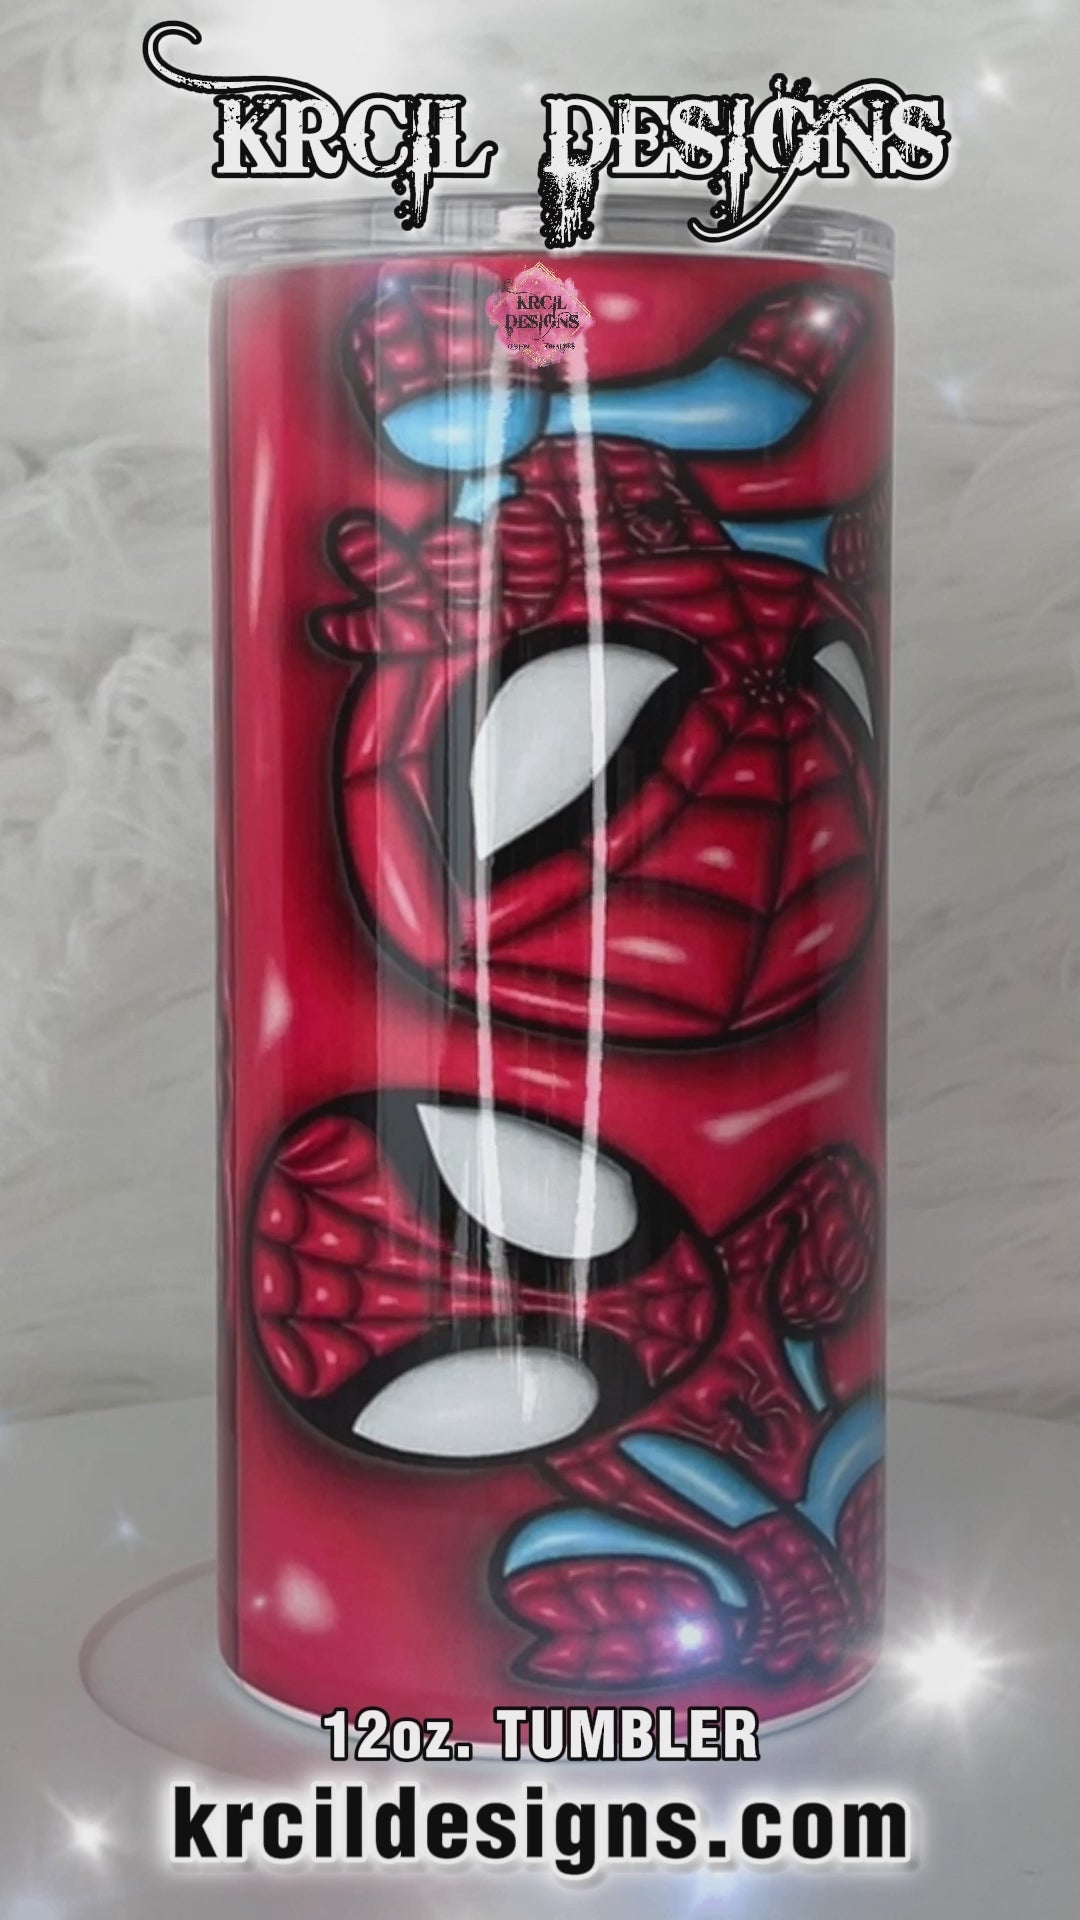 Spiderman Personalized Sippy Cup 